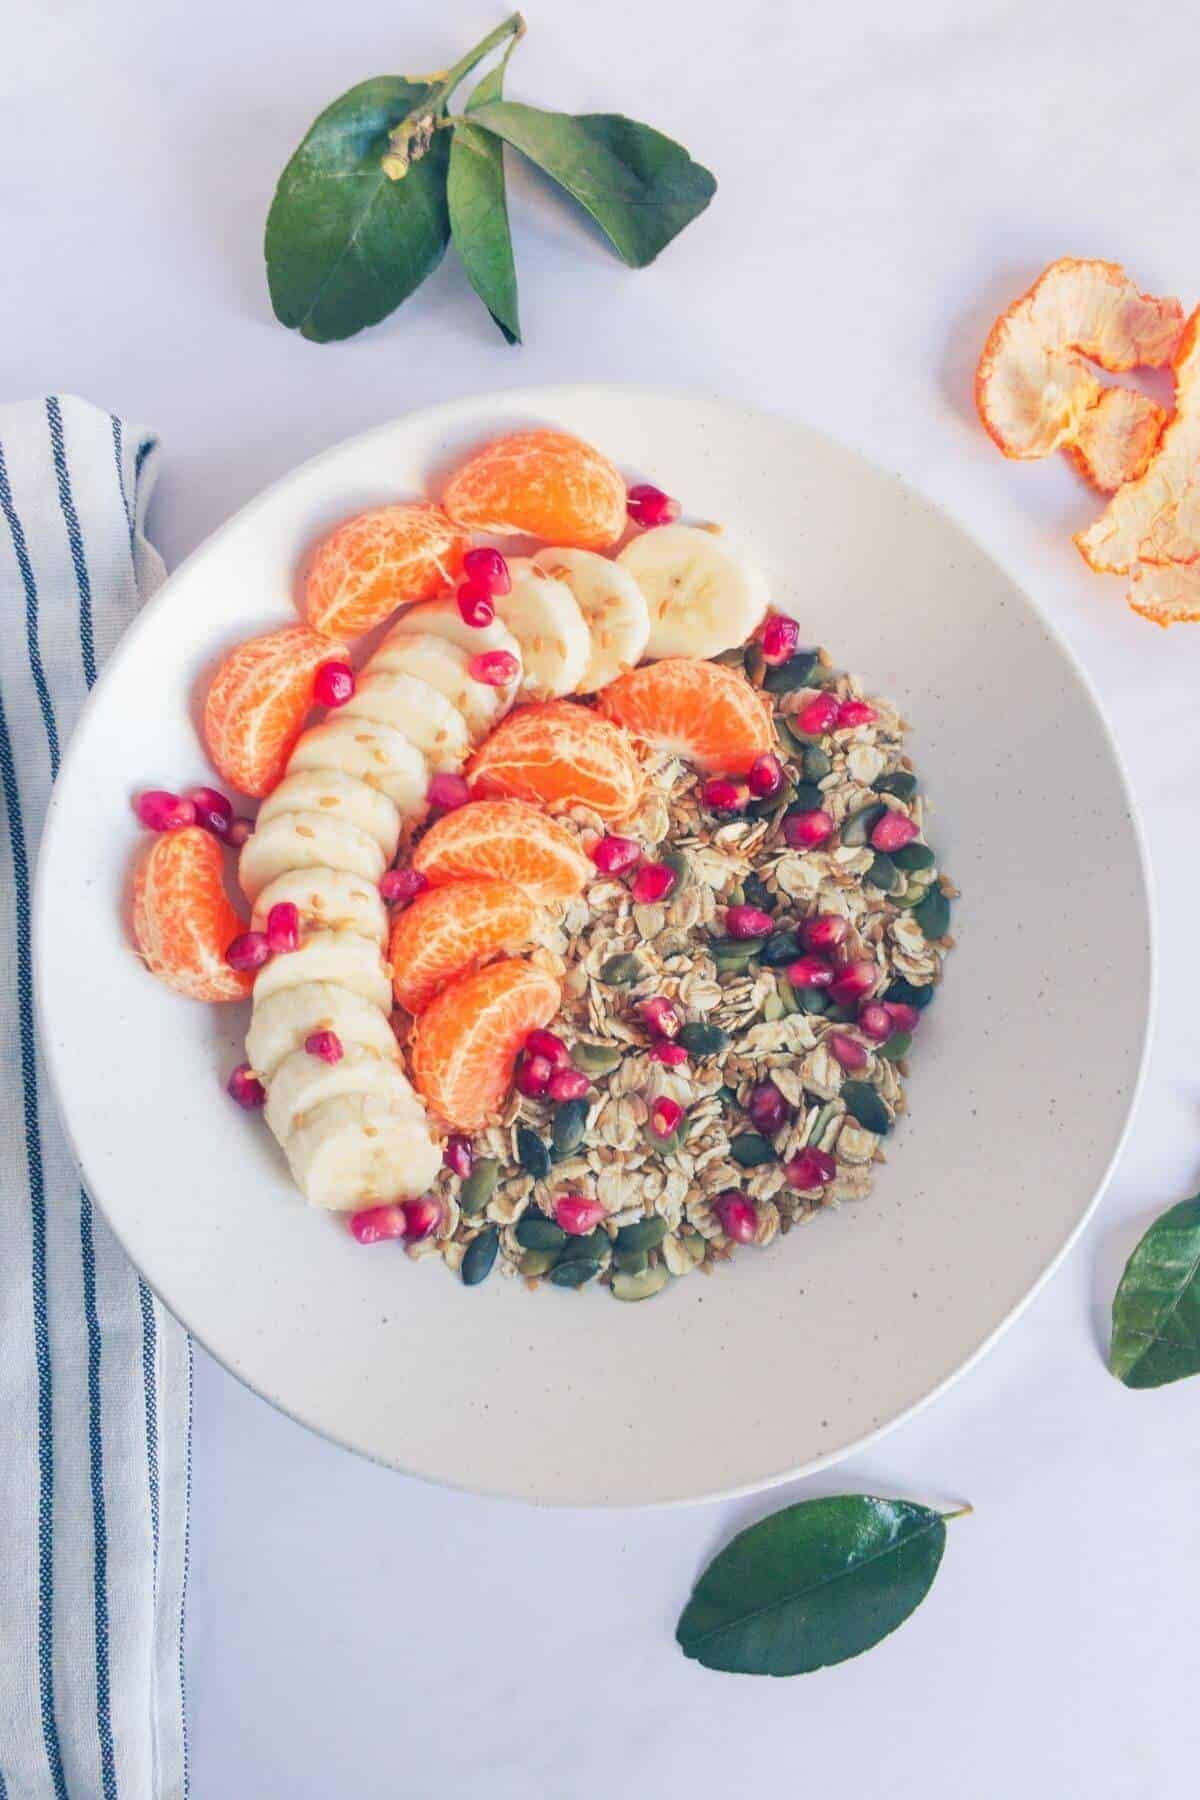 Rolled oats topped with pumpkin and pomegranate seeds, sliced banana and satsuma segments.